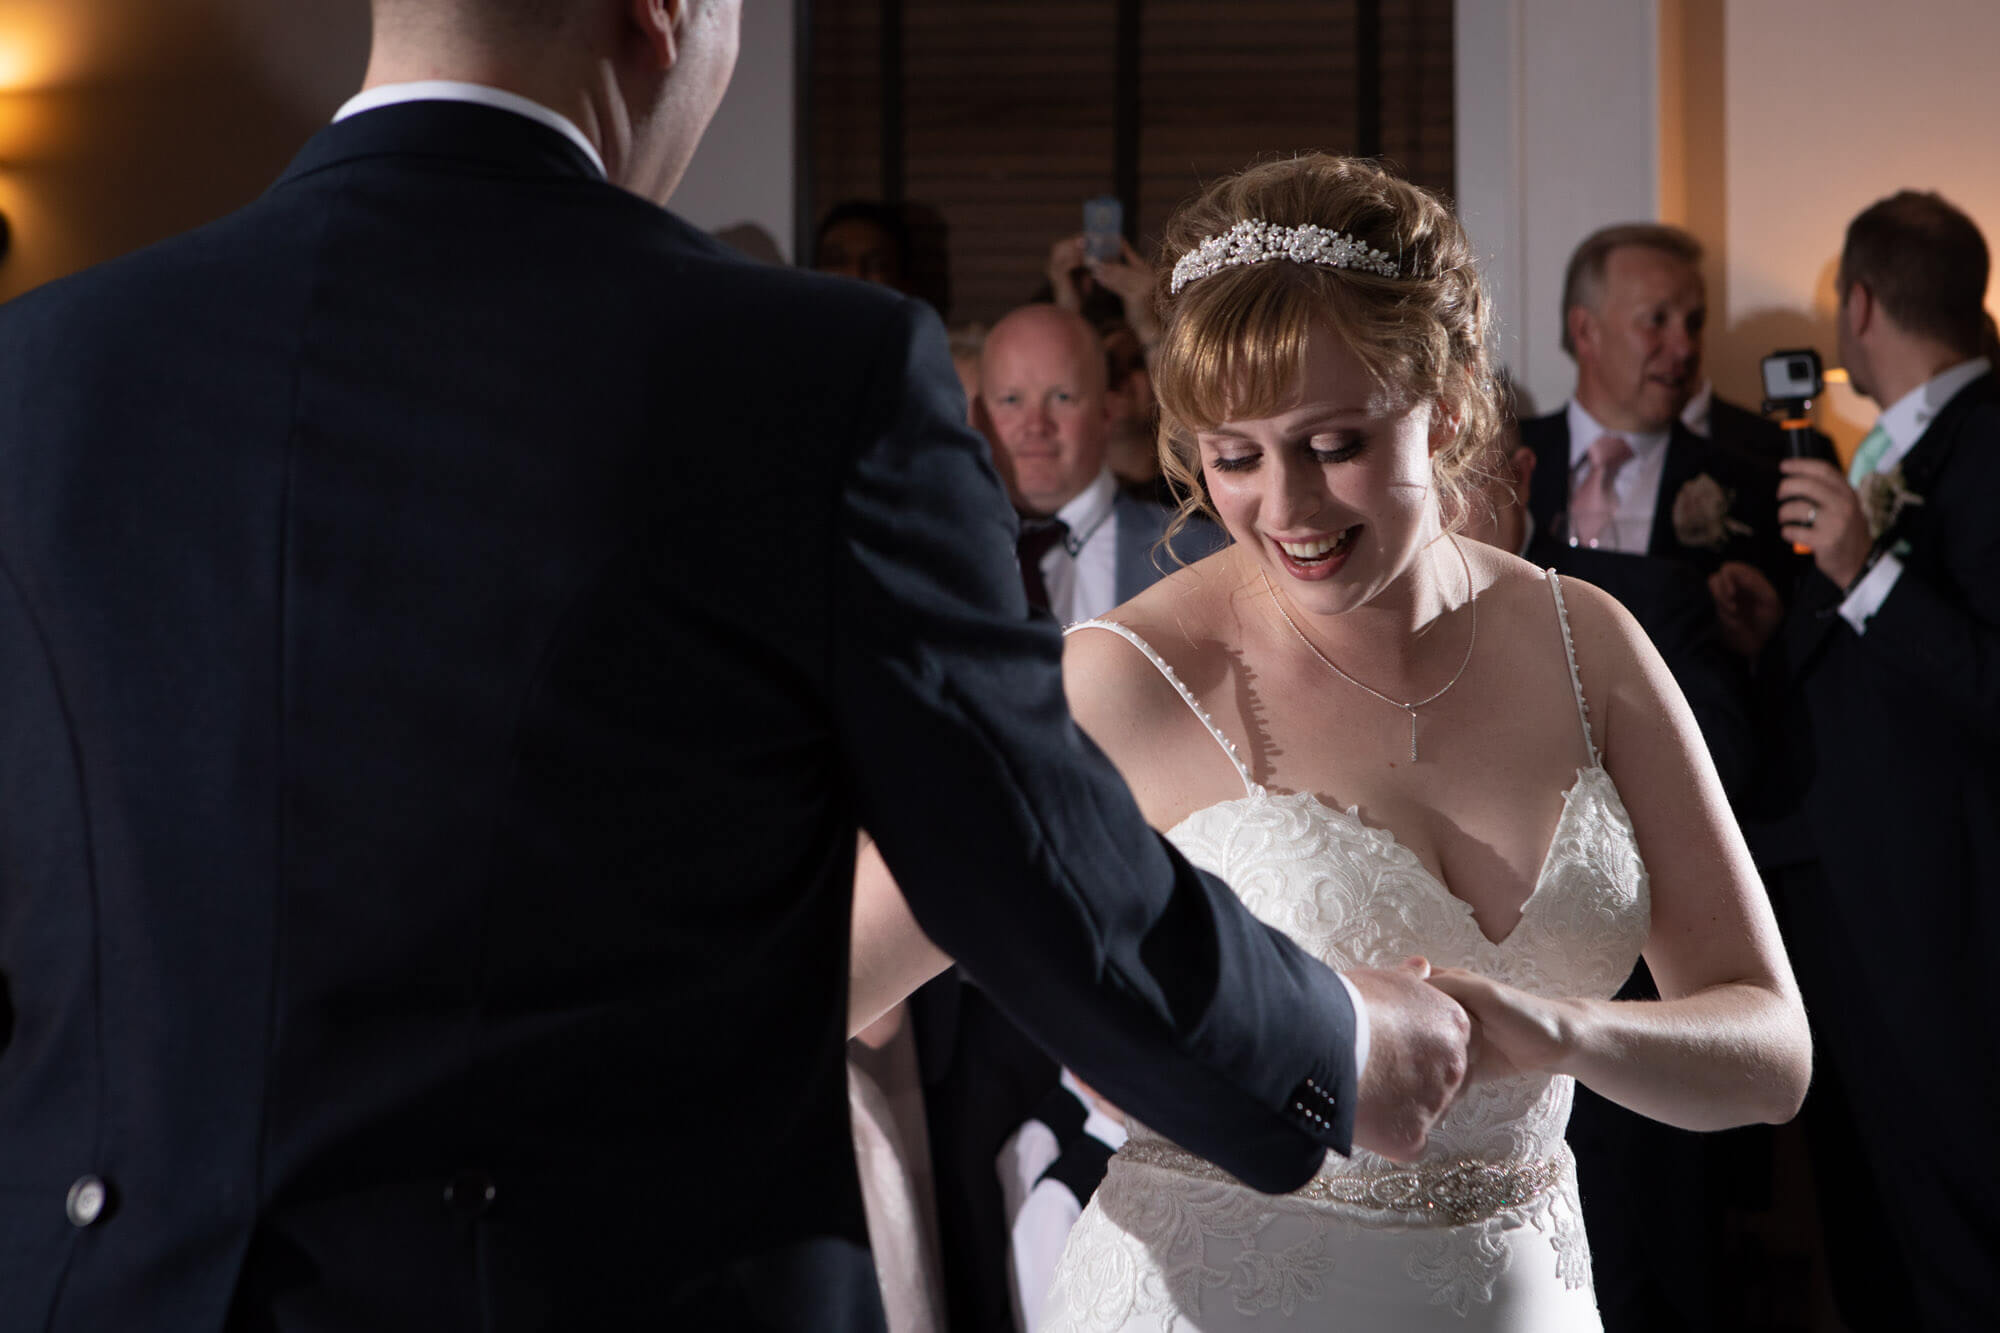 The bride and groom enjoy their first dance together as their guests watch